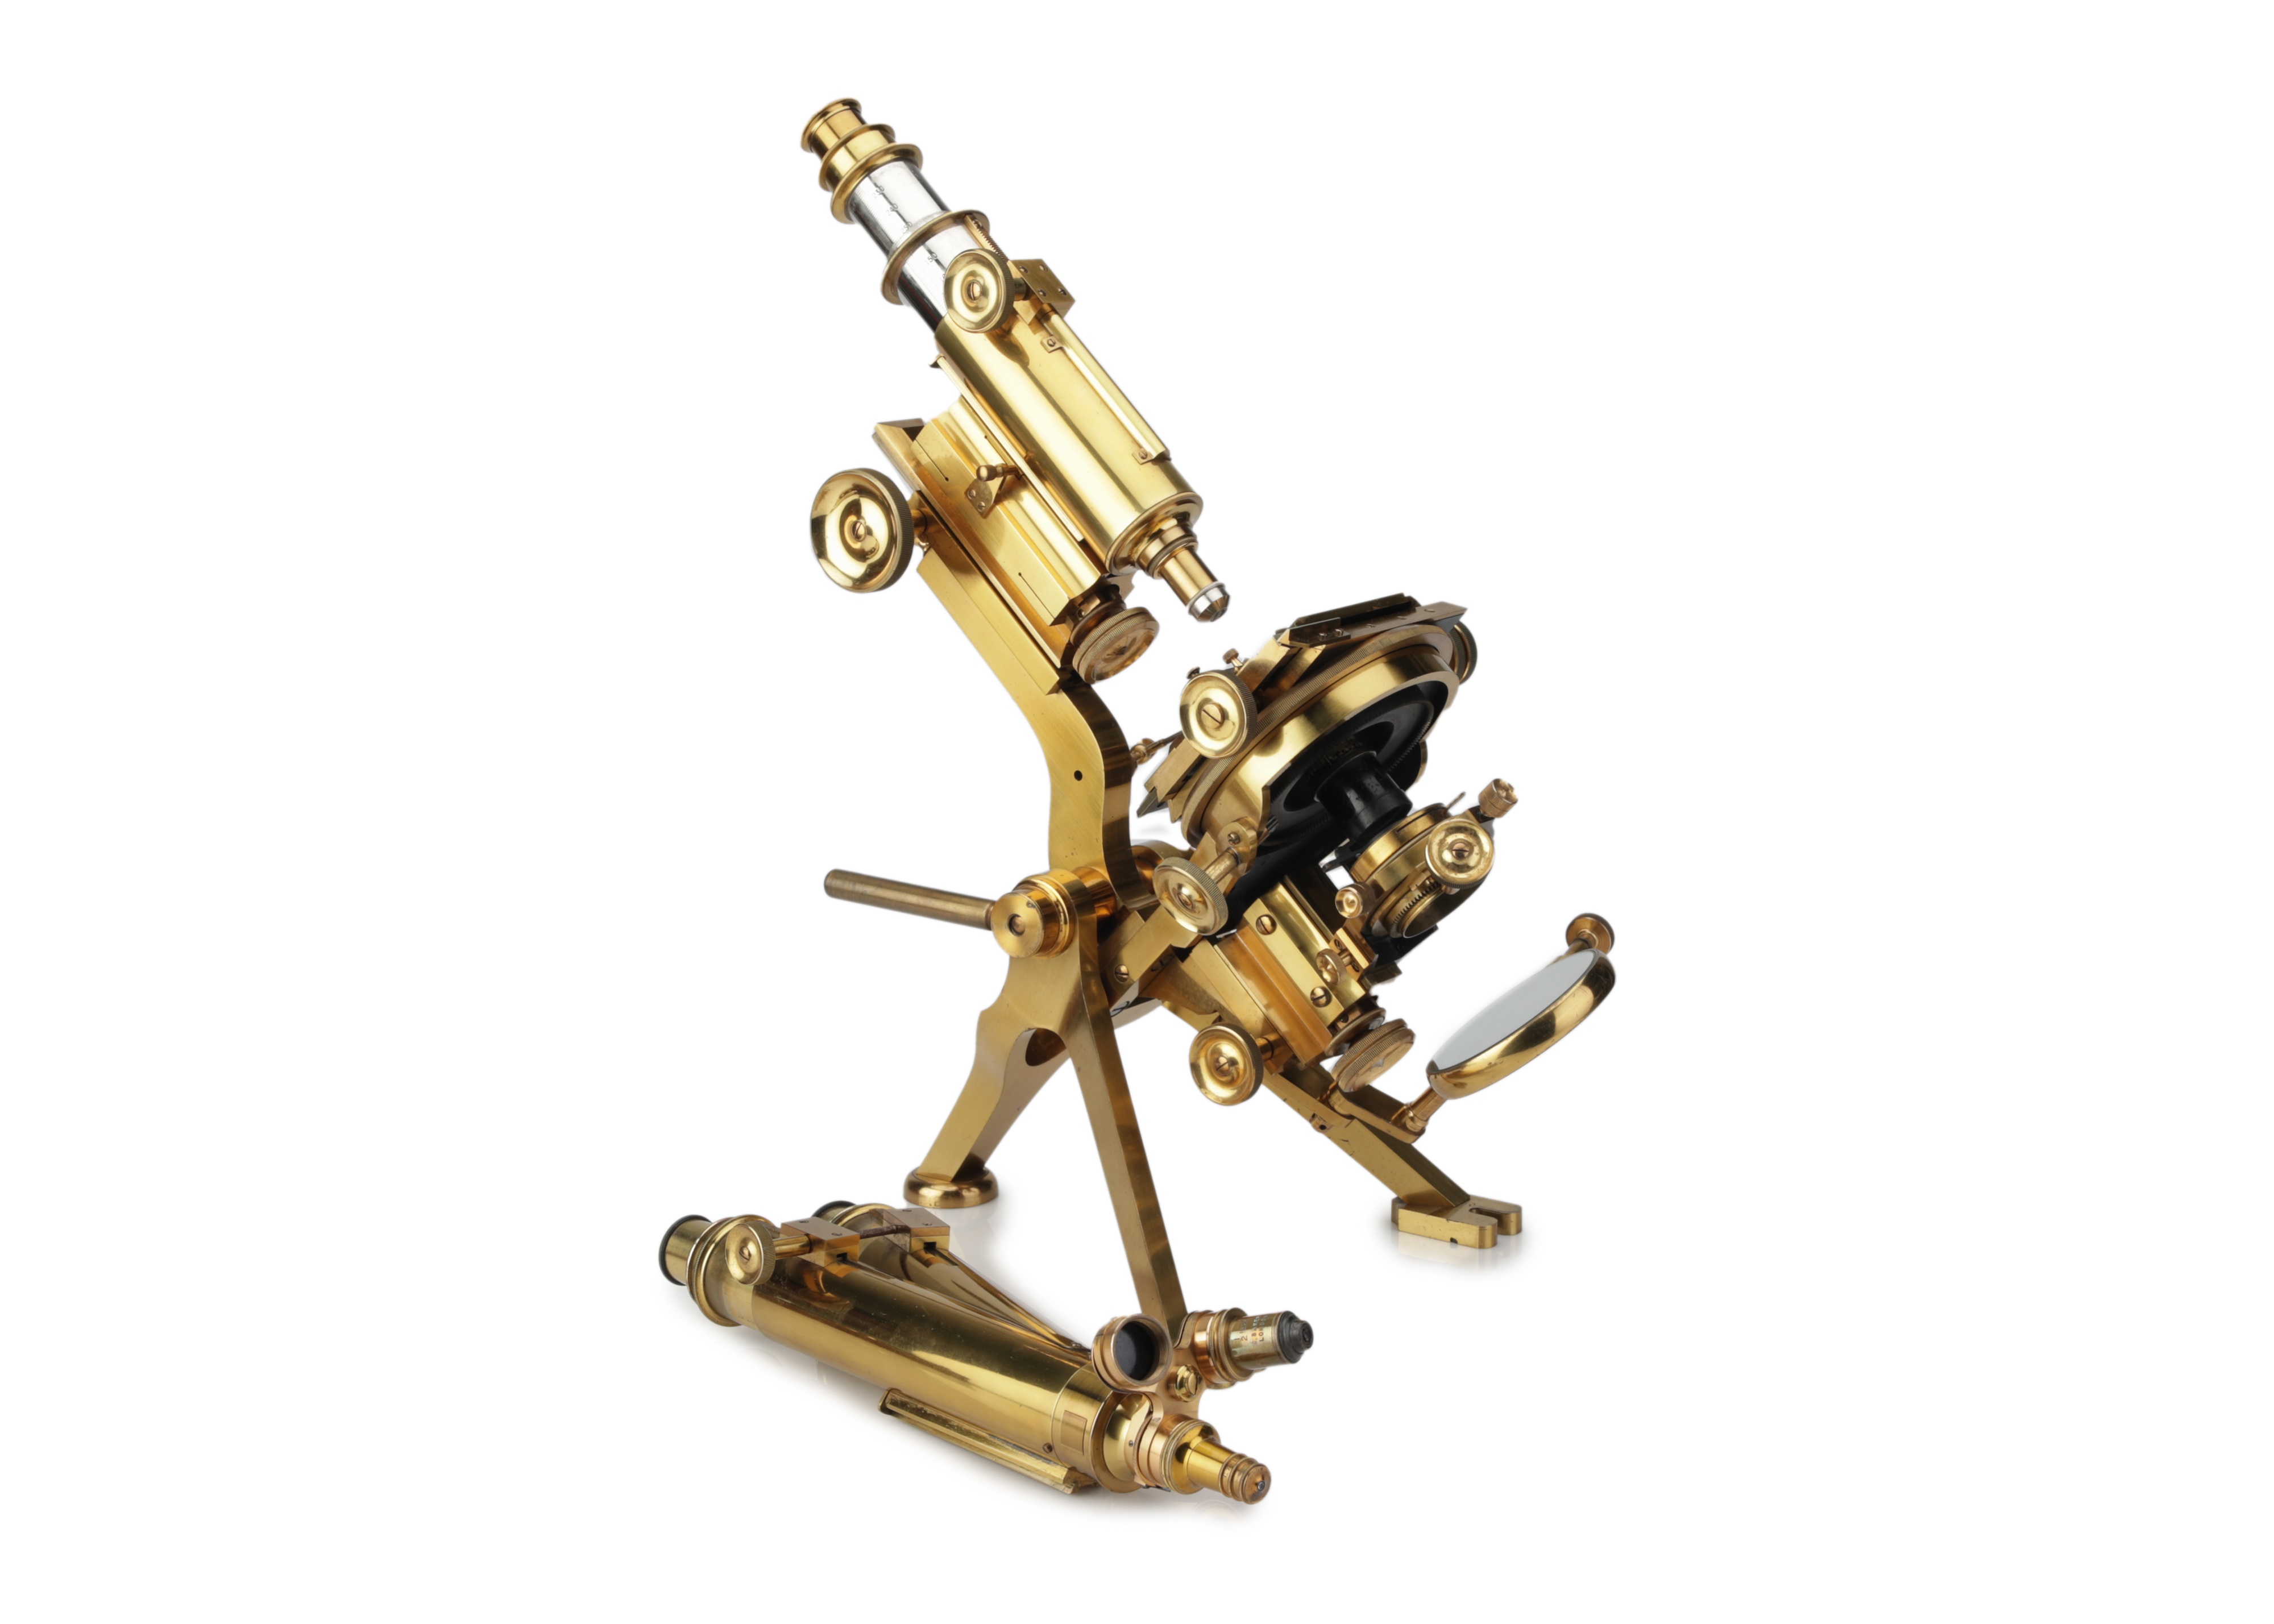 A Rare Baker Nelson-Curties No.1 Exhibition Monocular & Binocular Microscope, - Image 5 of 7